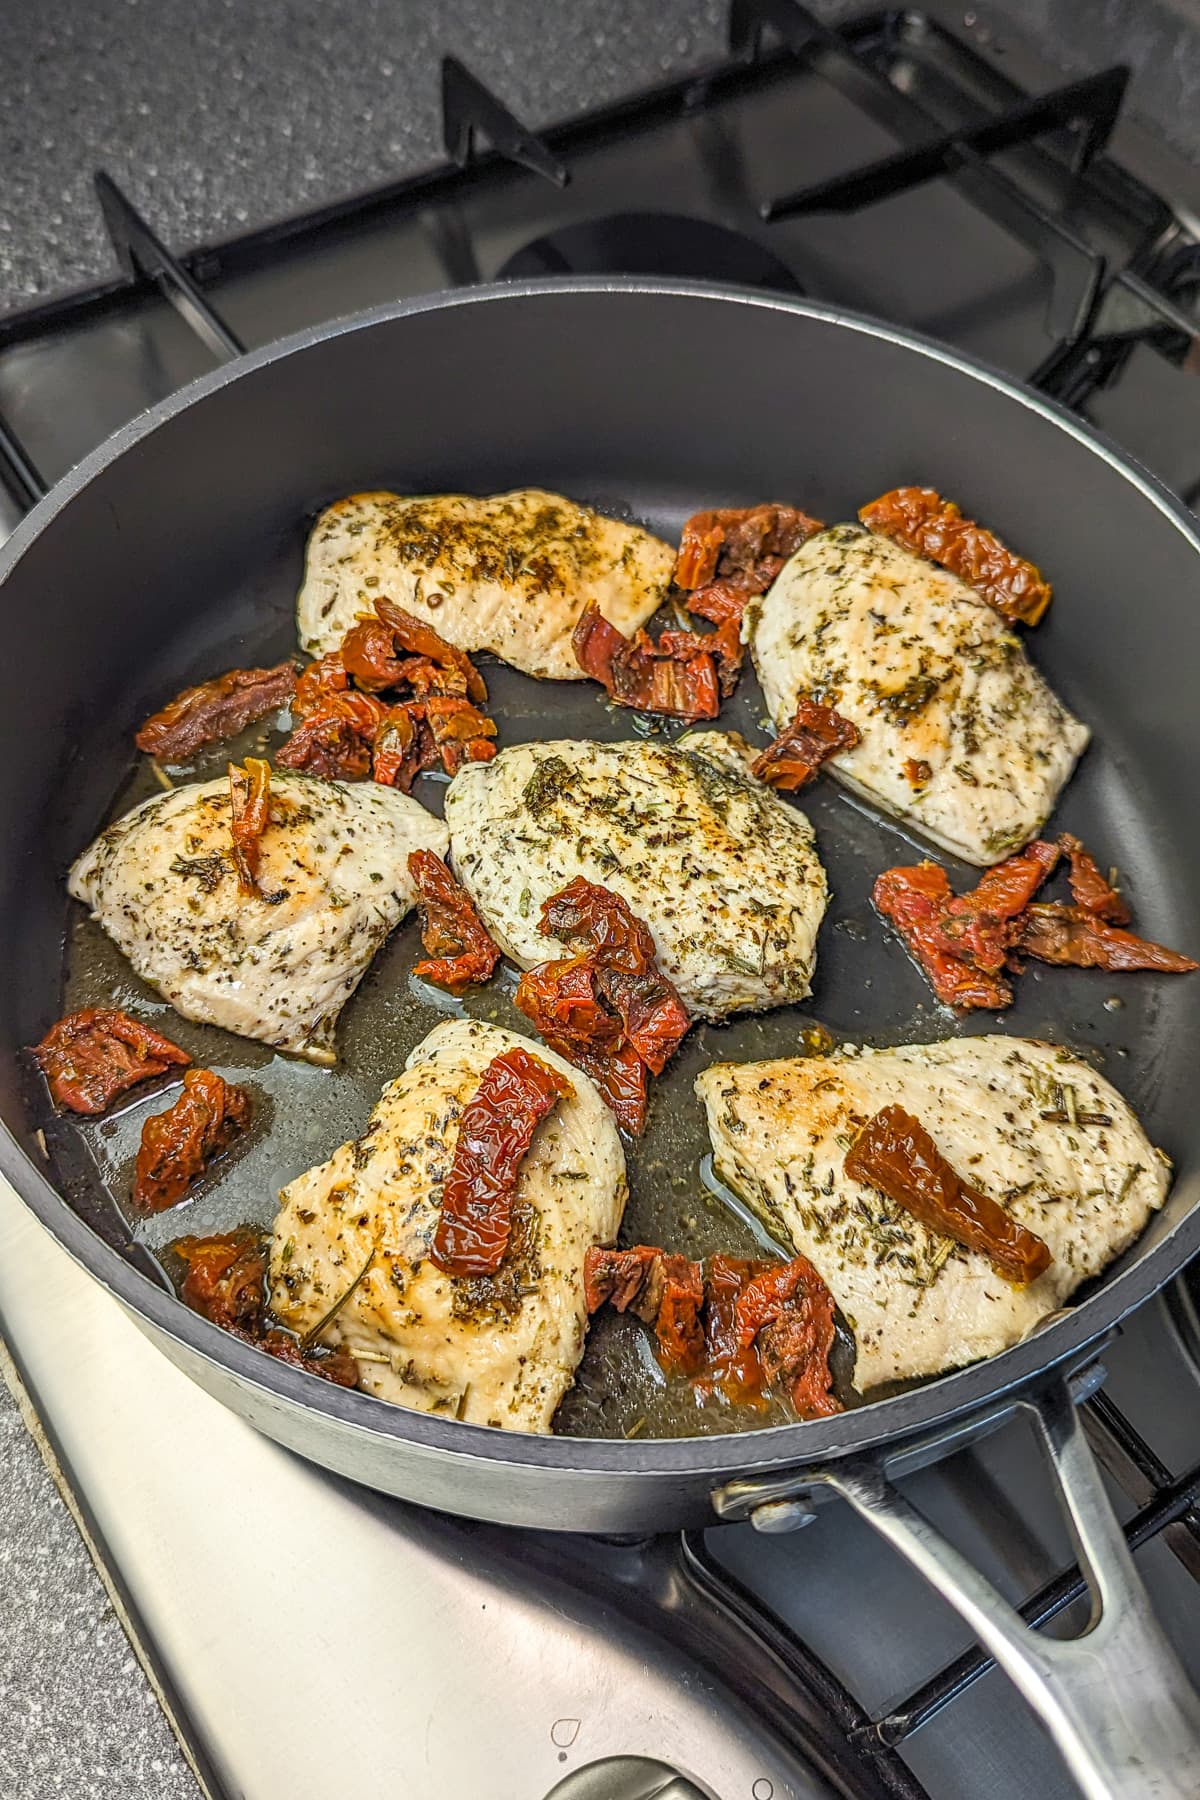 Cooked chicken breasts in a skillet with added sun-dried tomatoes, showing the beginning of a sauce.